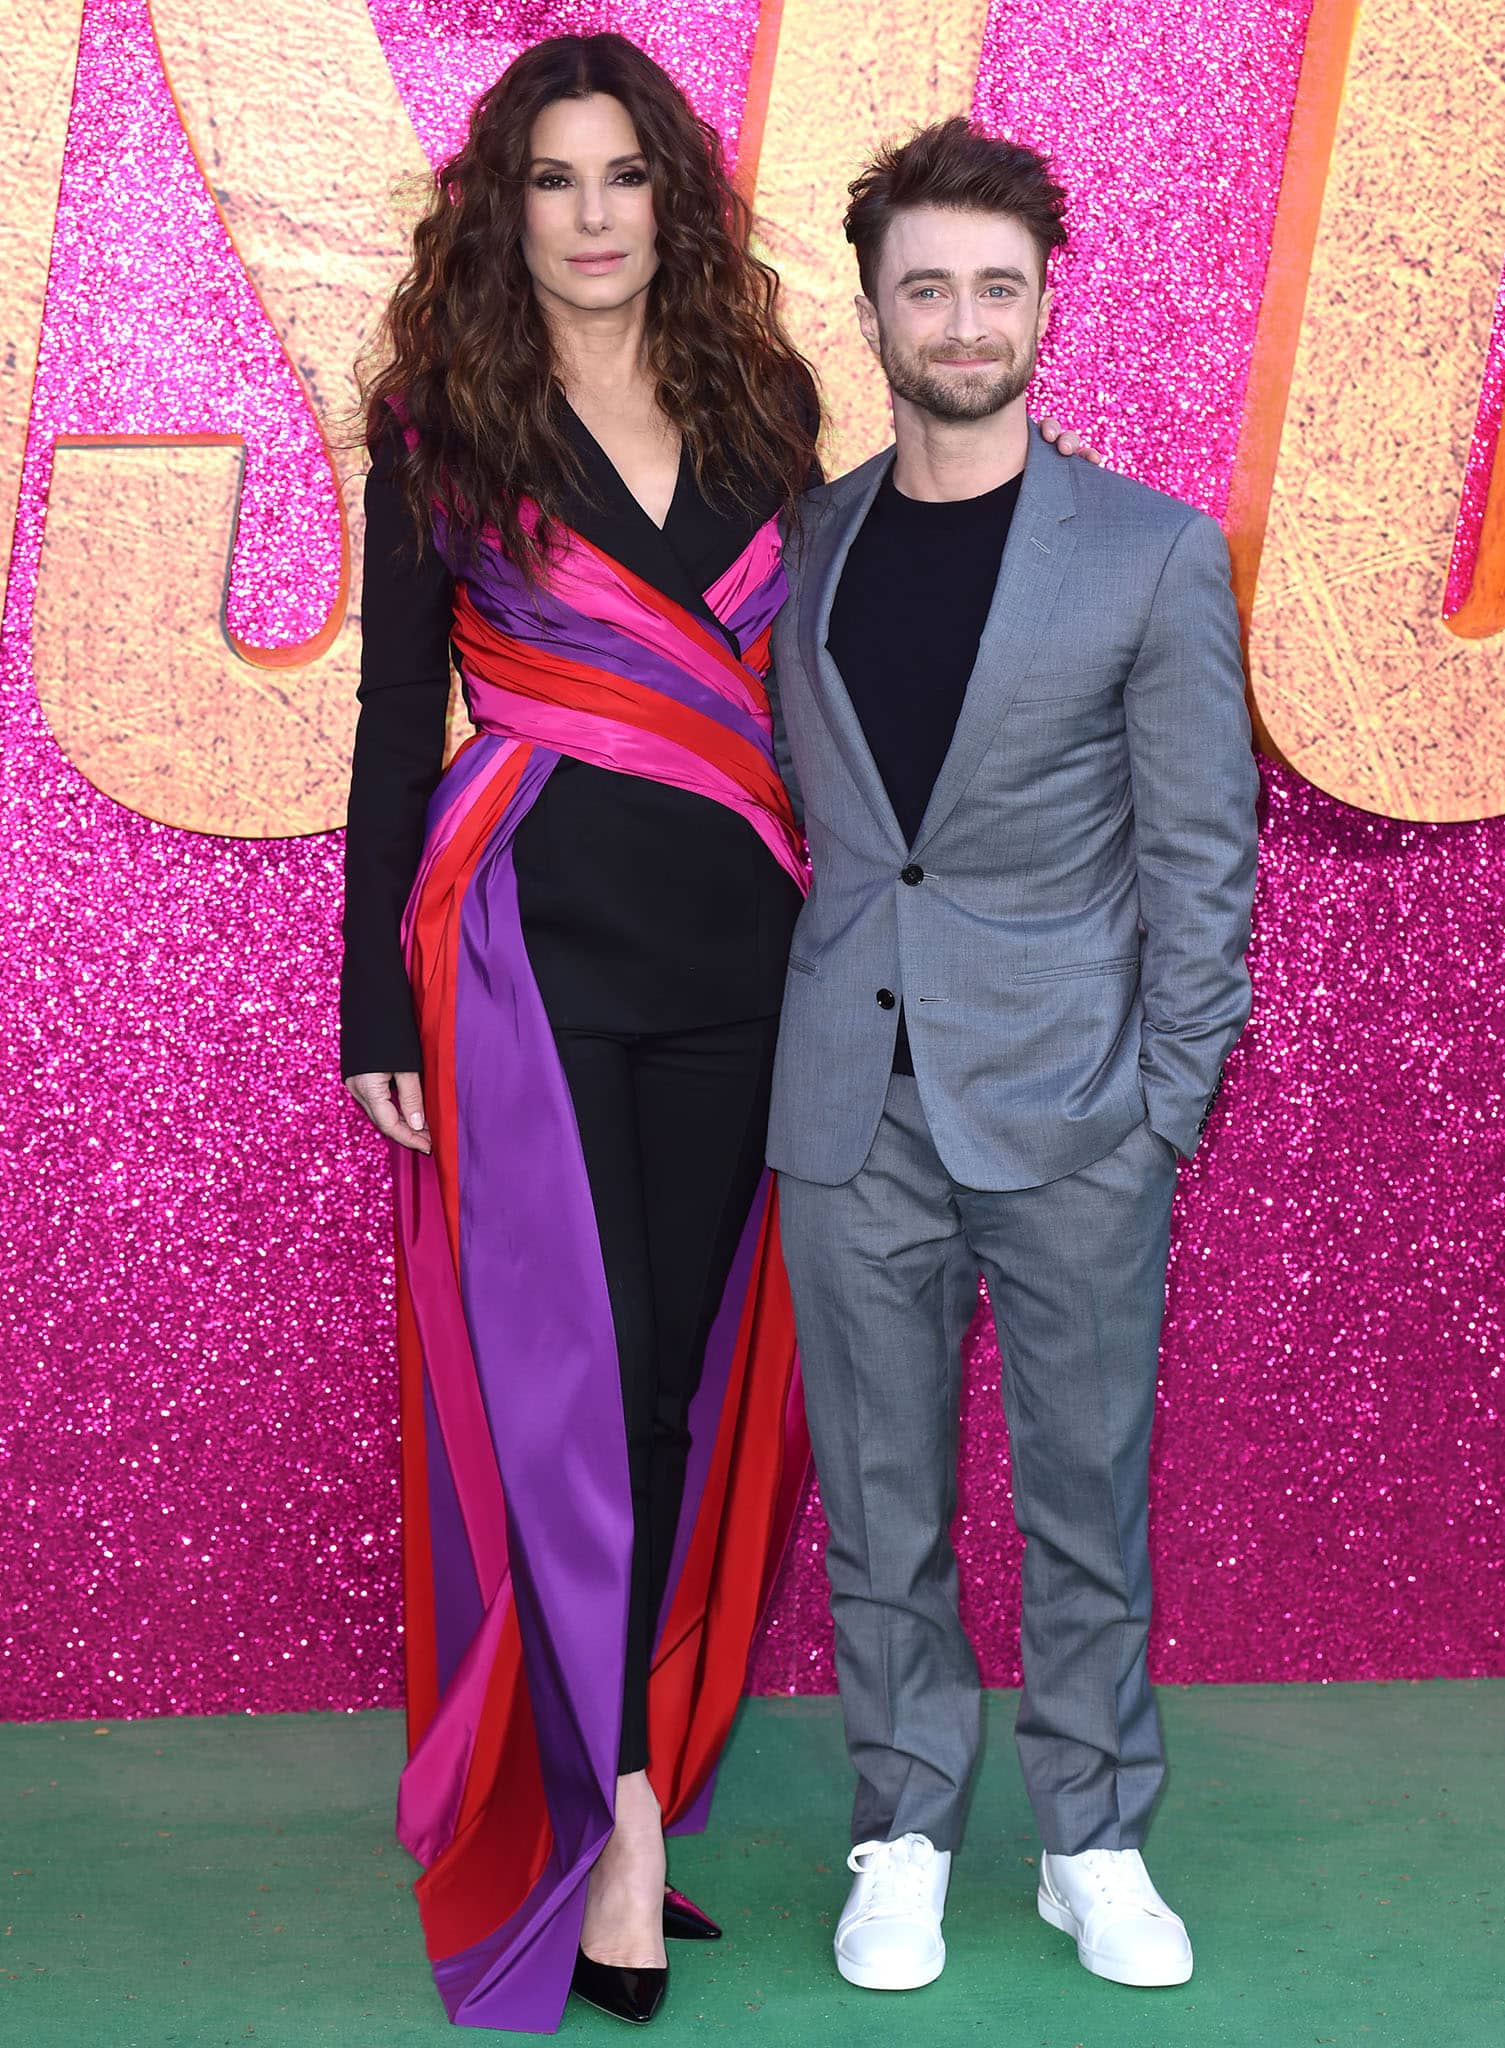 Sandra Bullock towers over Daniel Radcliffe who was clad in a gray suit and a black knit sweater